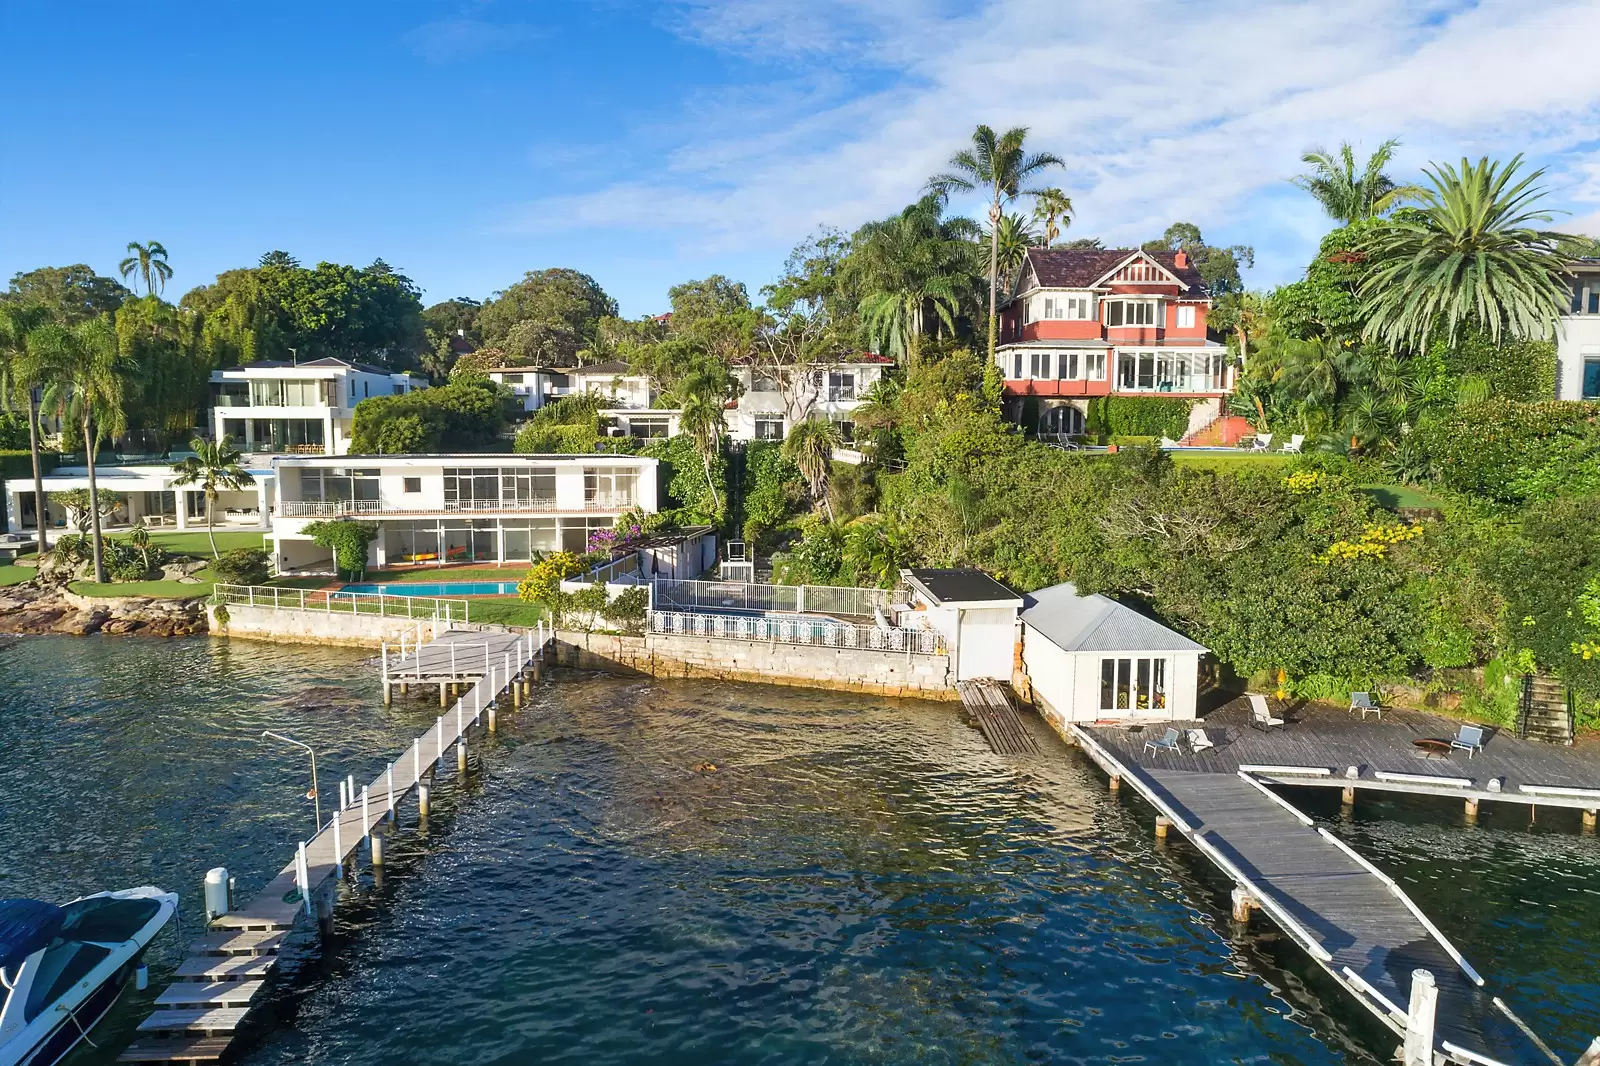 Photo #6: 15B Coolong Road, Vaucluse - Sold by Sydney Sotheby's International Realty